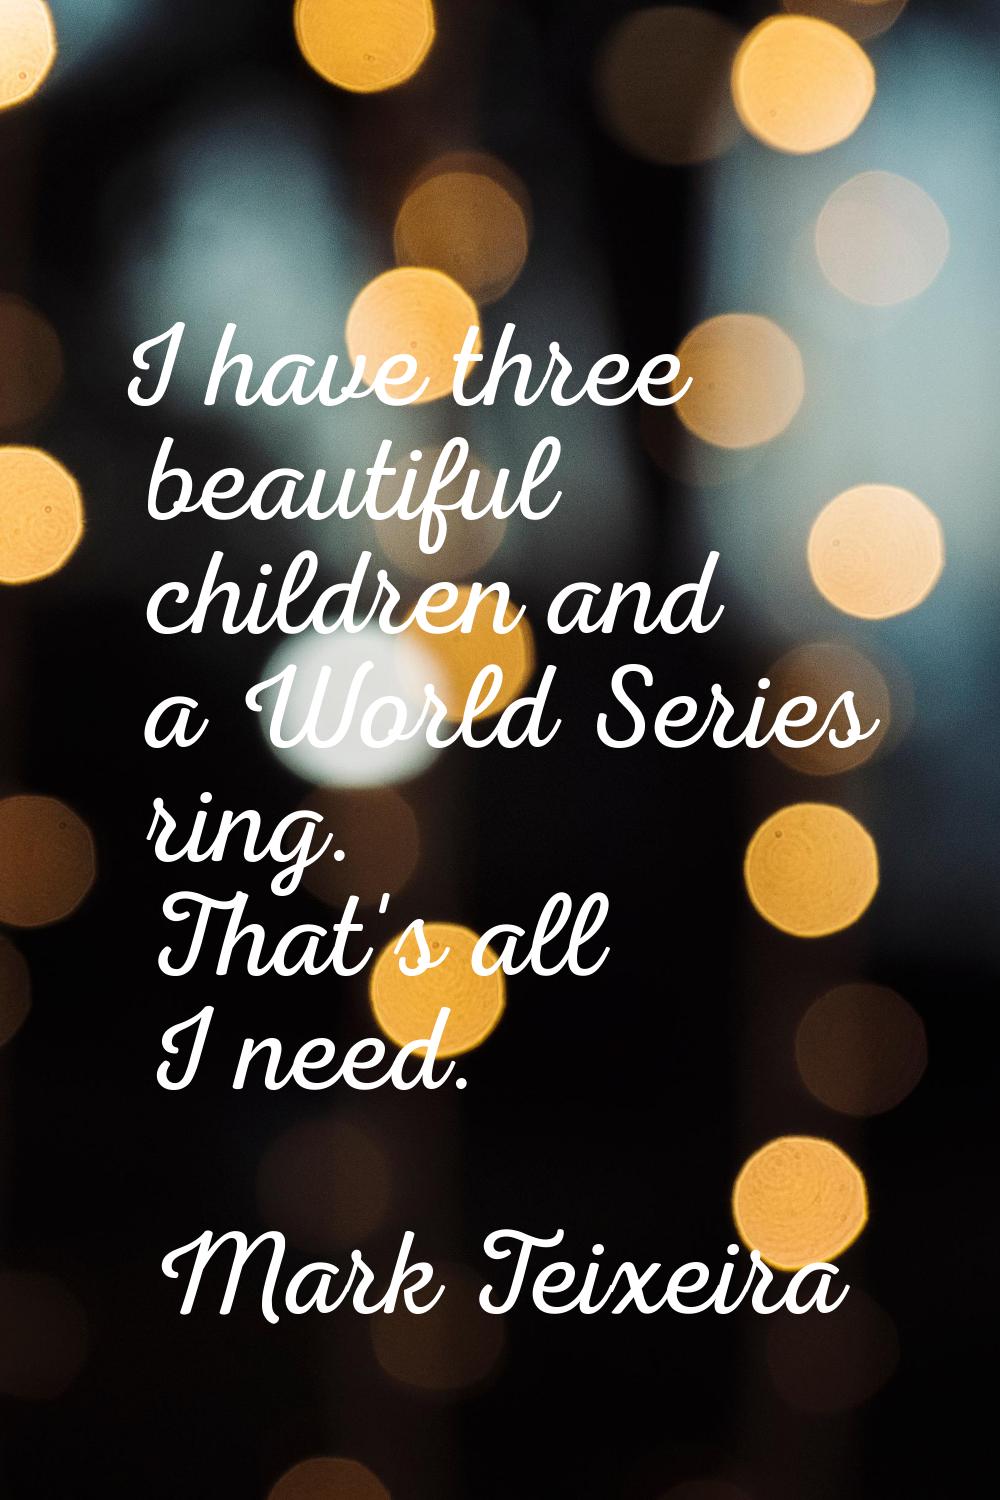 I have three beautiful children and a World Series ring. That's all I need.